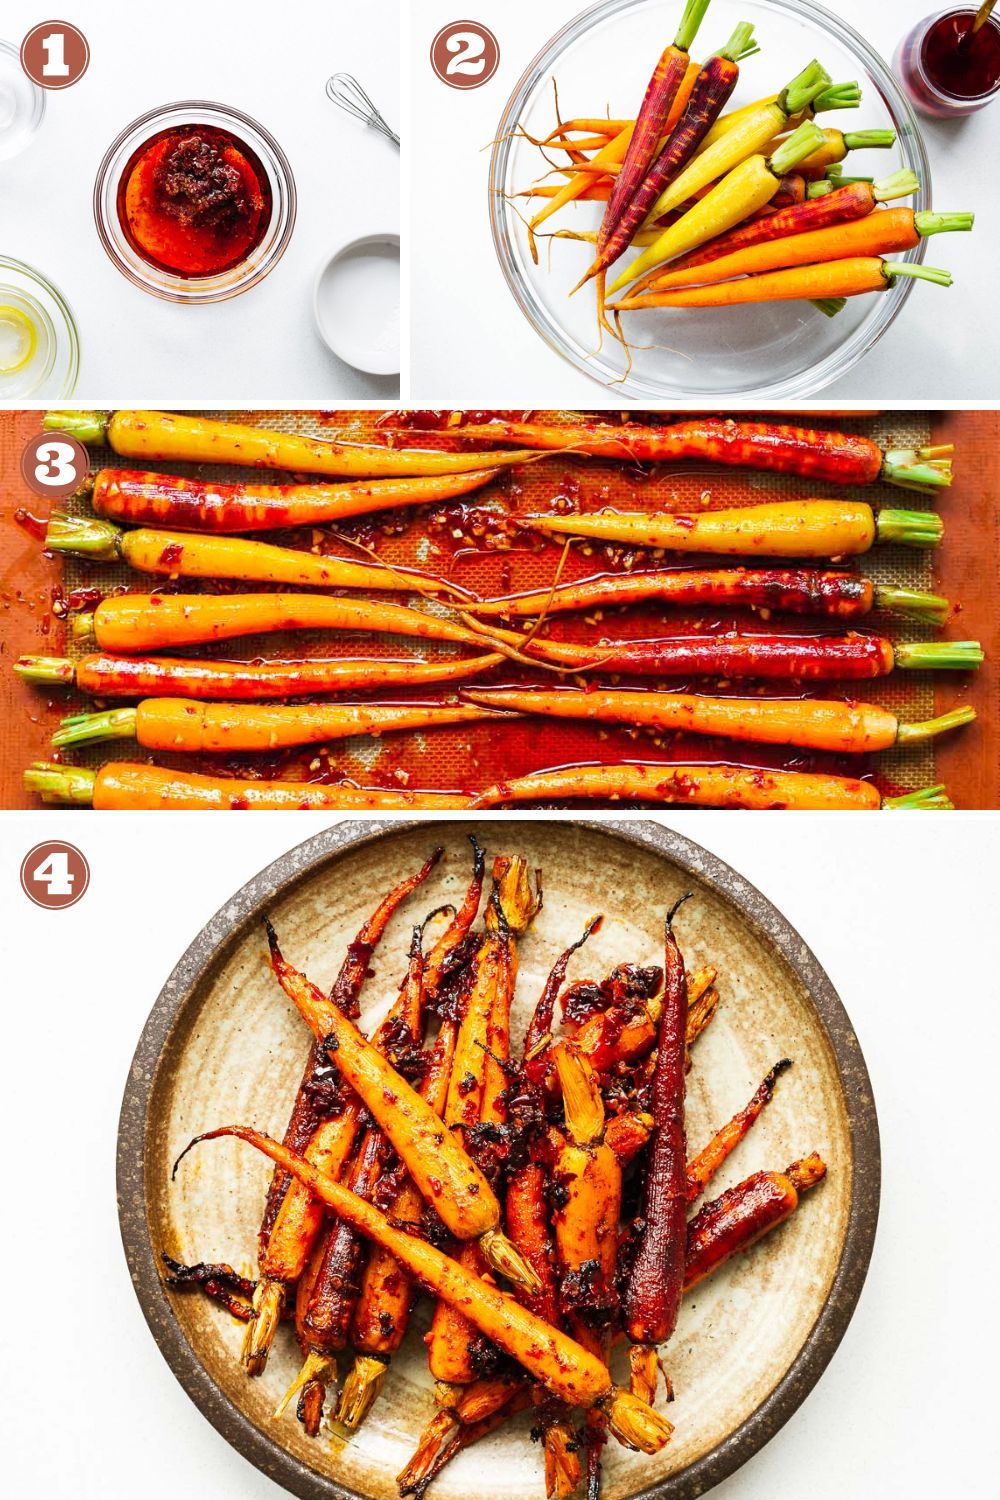 Step-by-step instructions for how to make harissa roasted carrots: Mix the marinade, toss carrots, roast carrots in harissa, and serve.